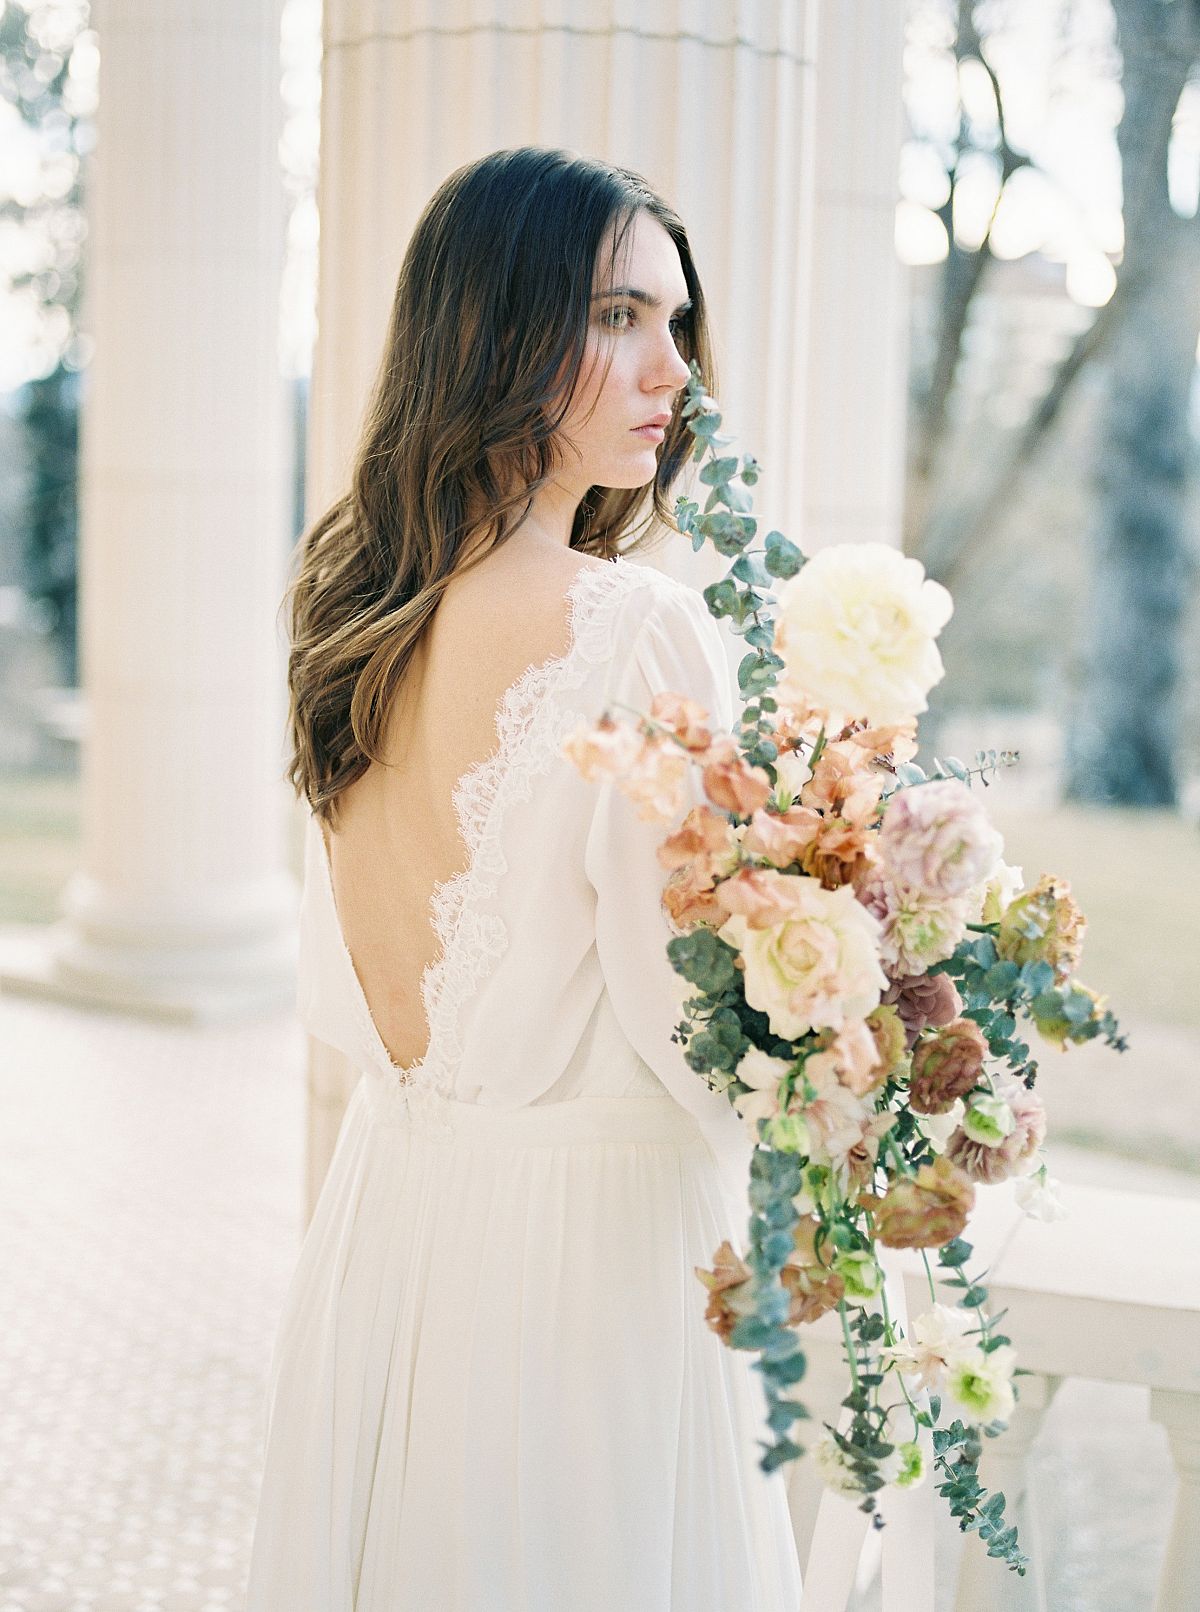 Blush and Caramel Florals for a Spring Wedding